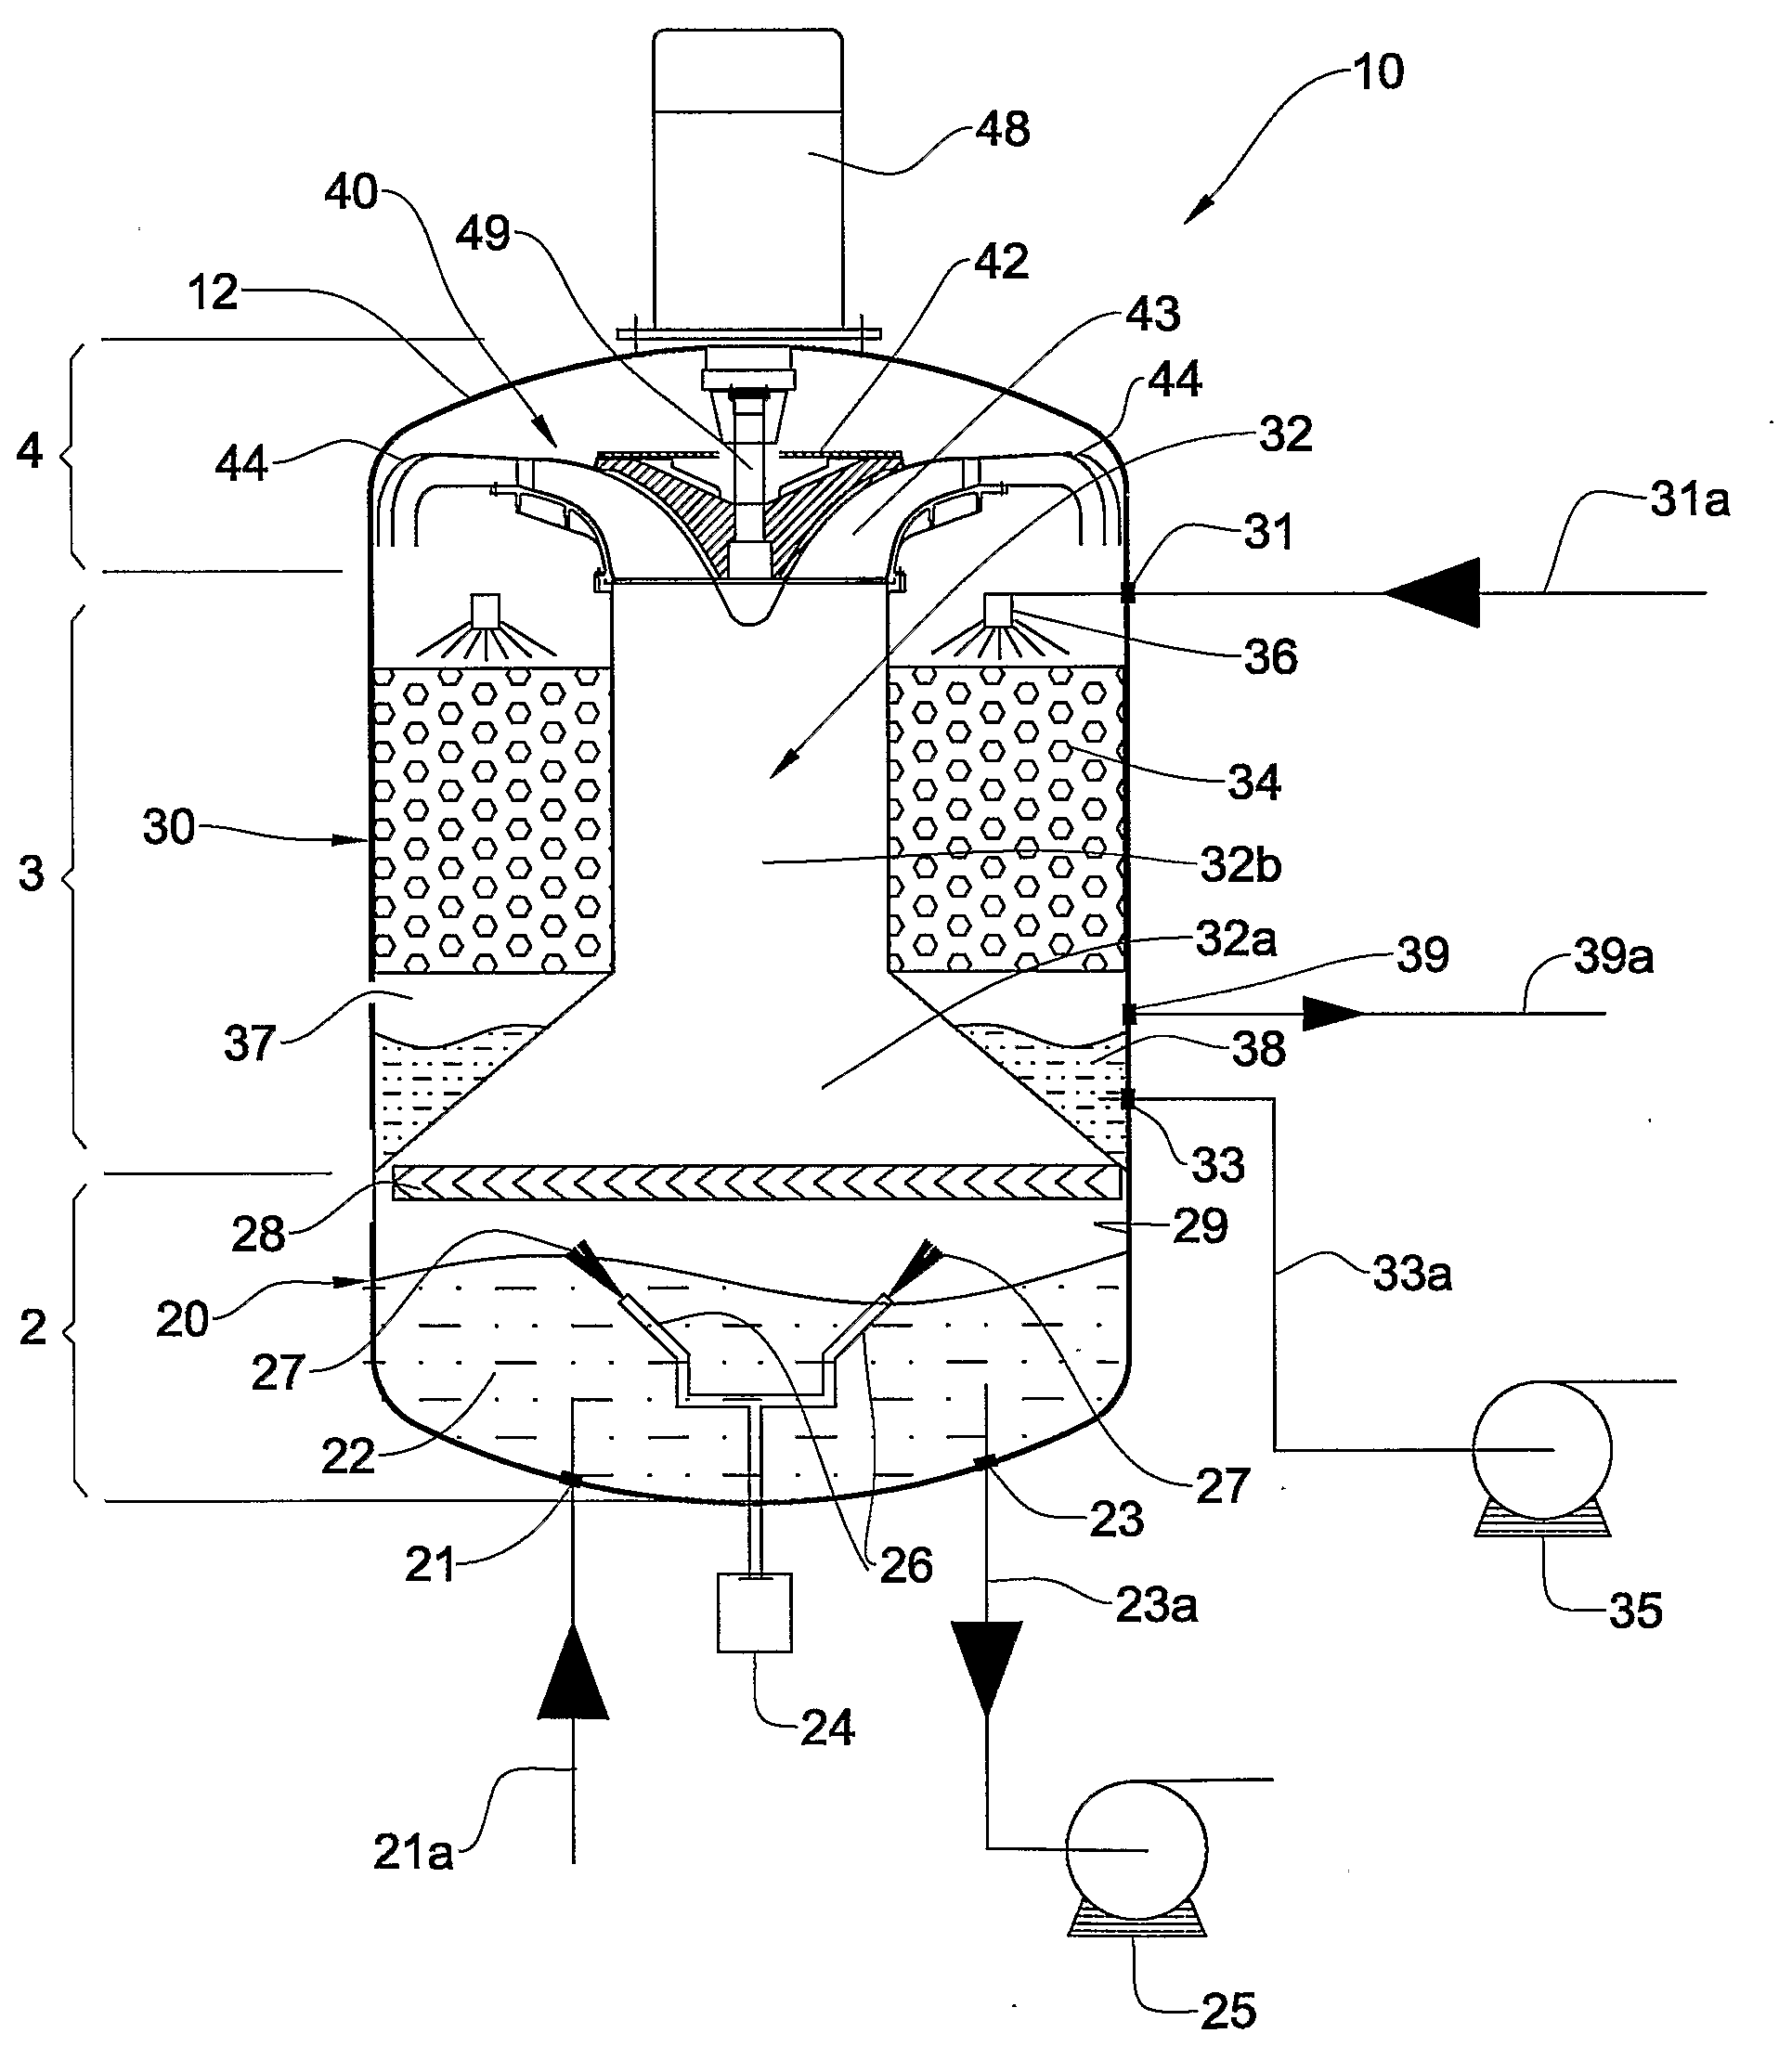 Compact Heat Pump Using Water as Refrigerant